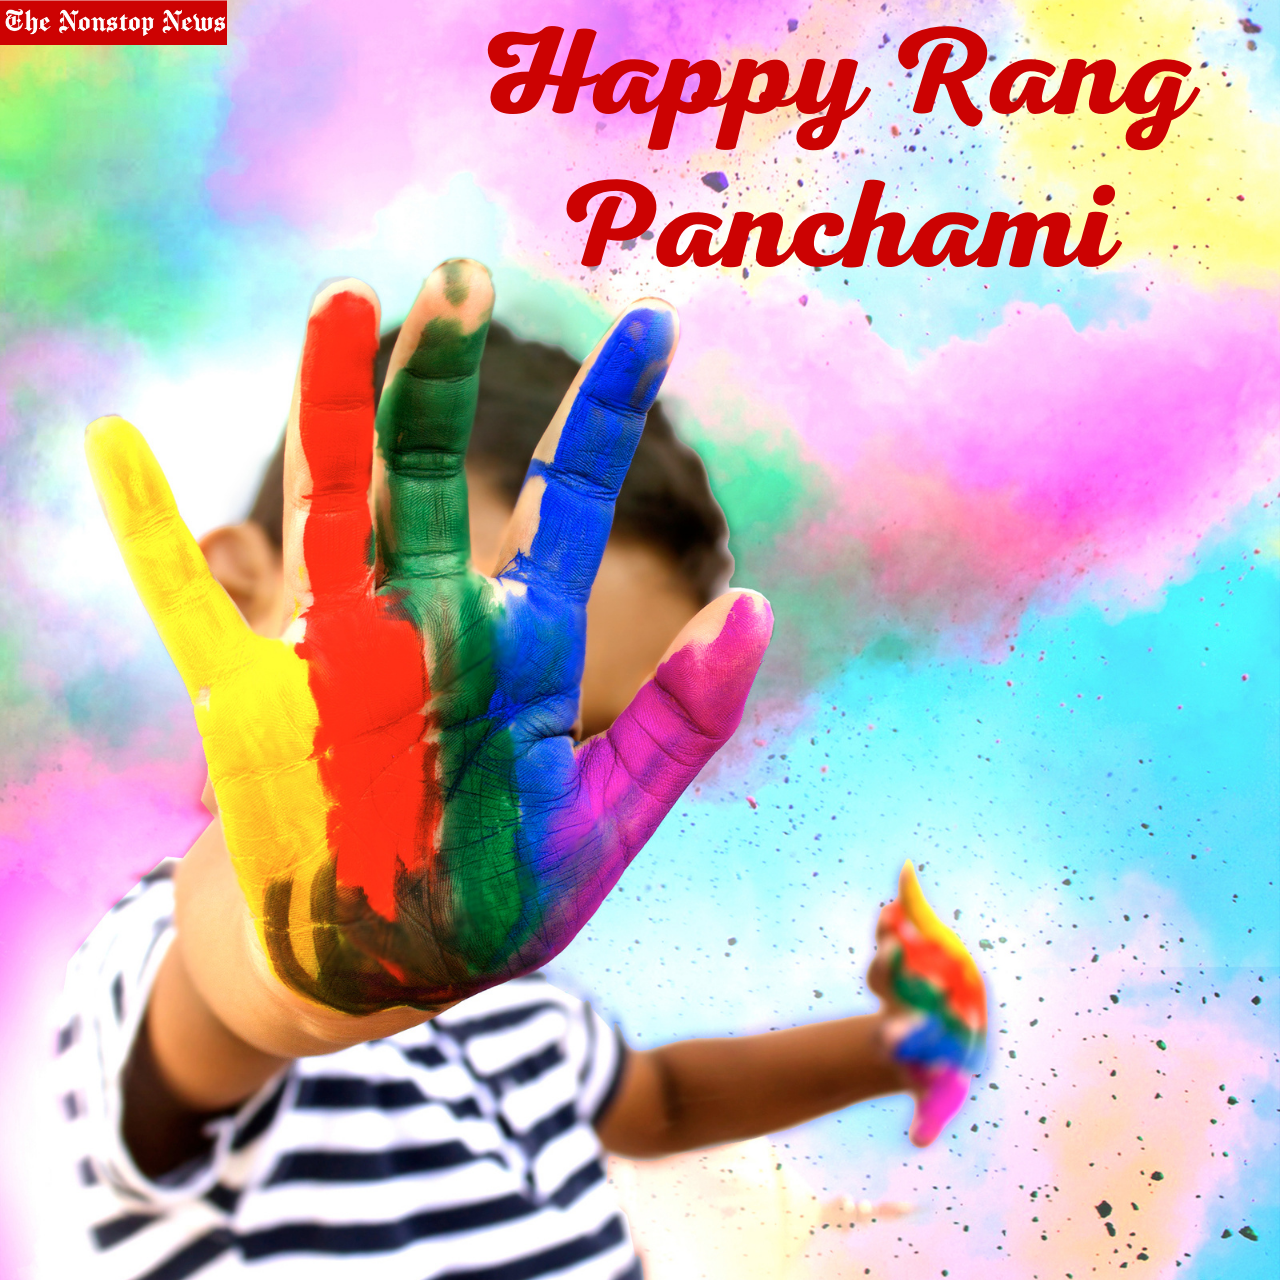 Happy Rang Panchami 2022 Wishes, HD Images, Quotes, Messages, And Greetings to Share